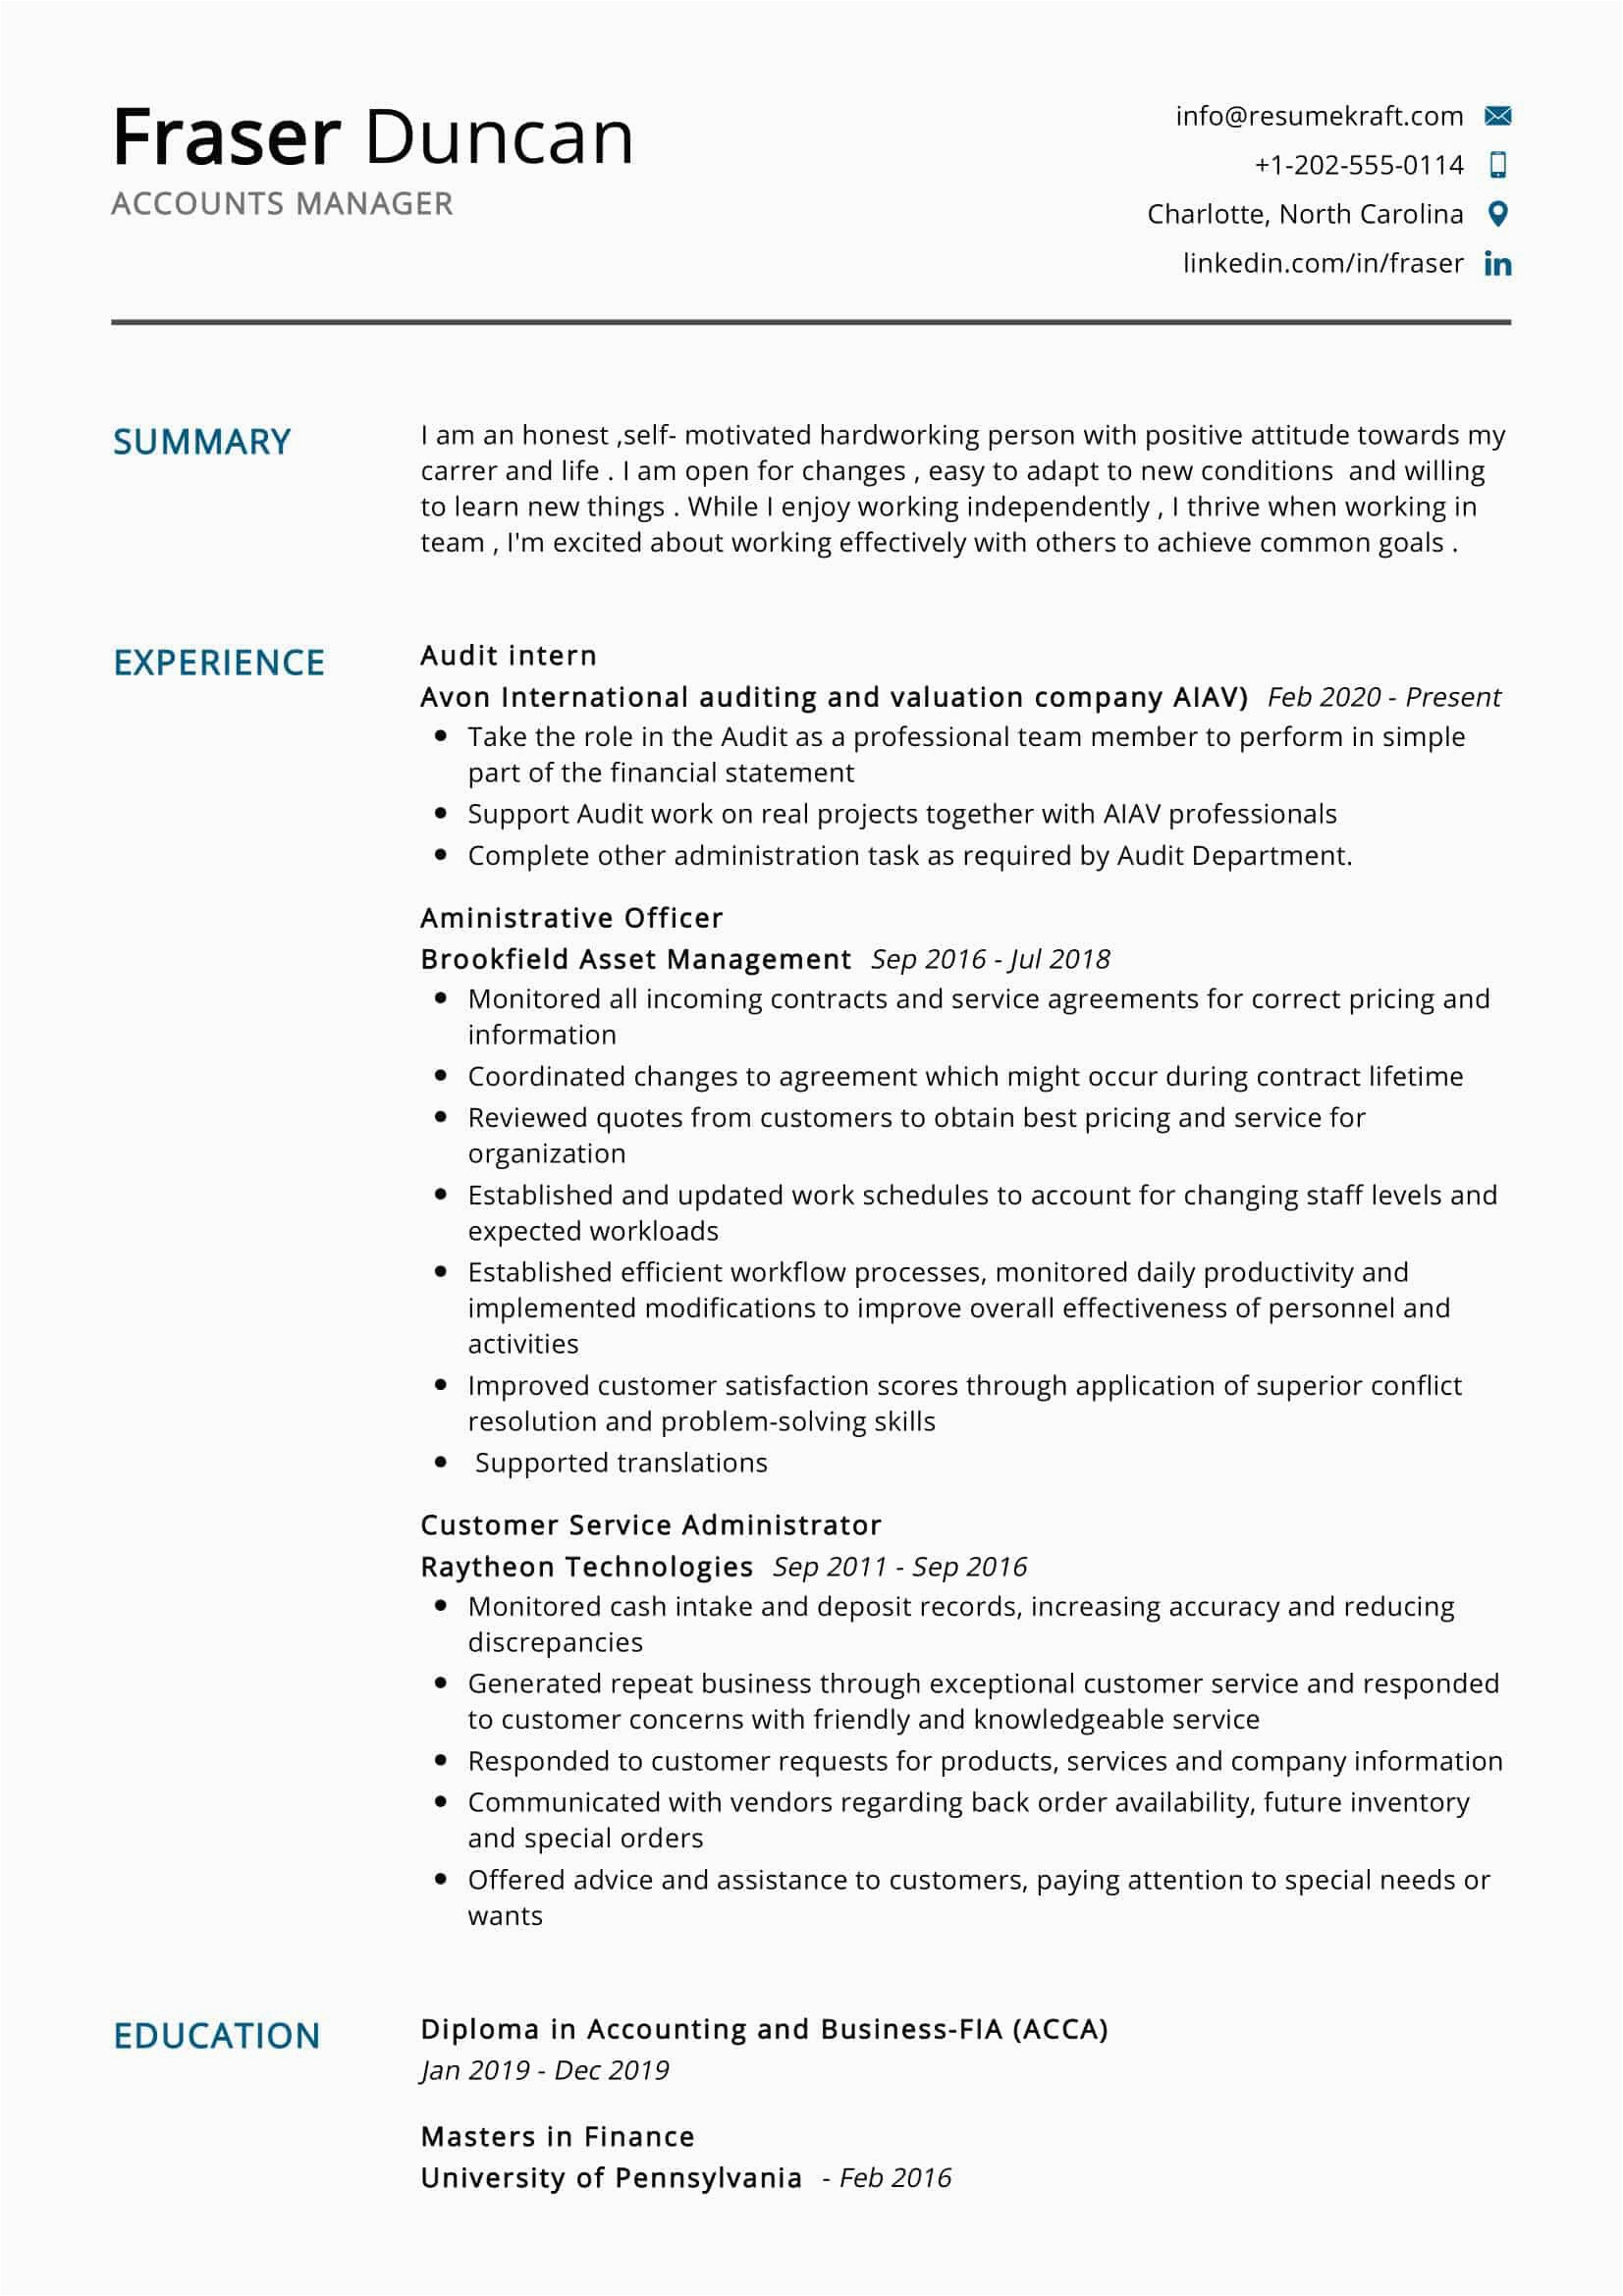 Sample Resume for Account Manager Position Accounts Manager Resume Sample Resumekraft